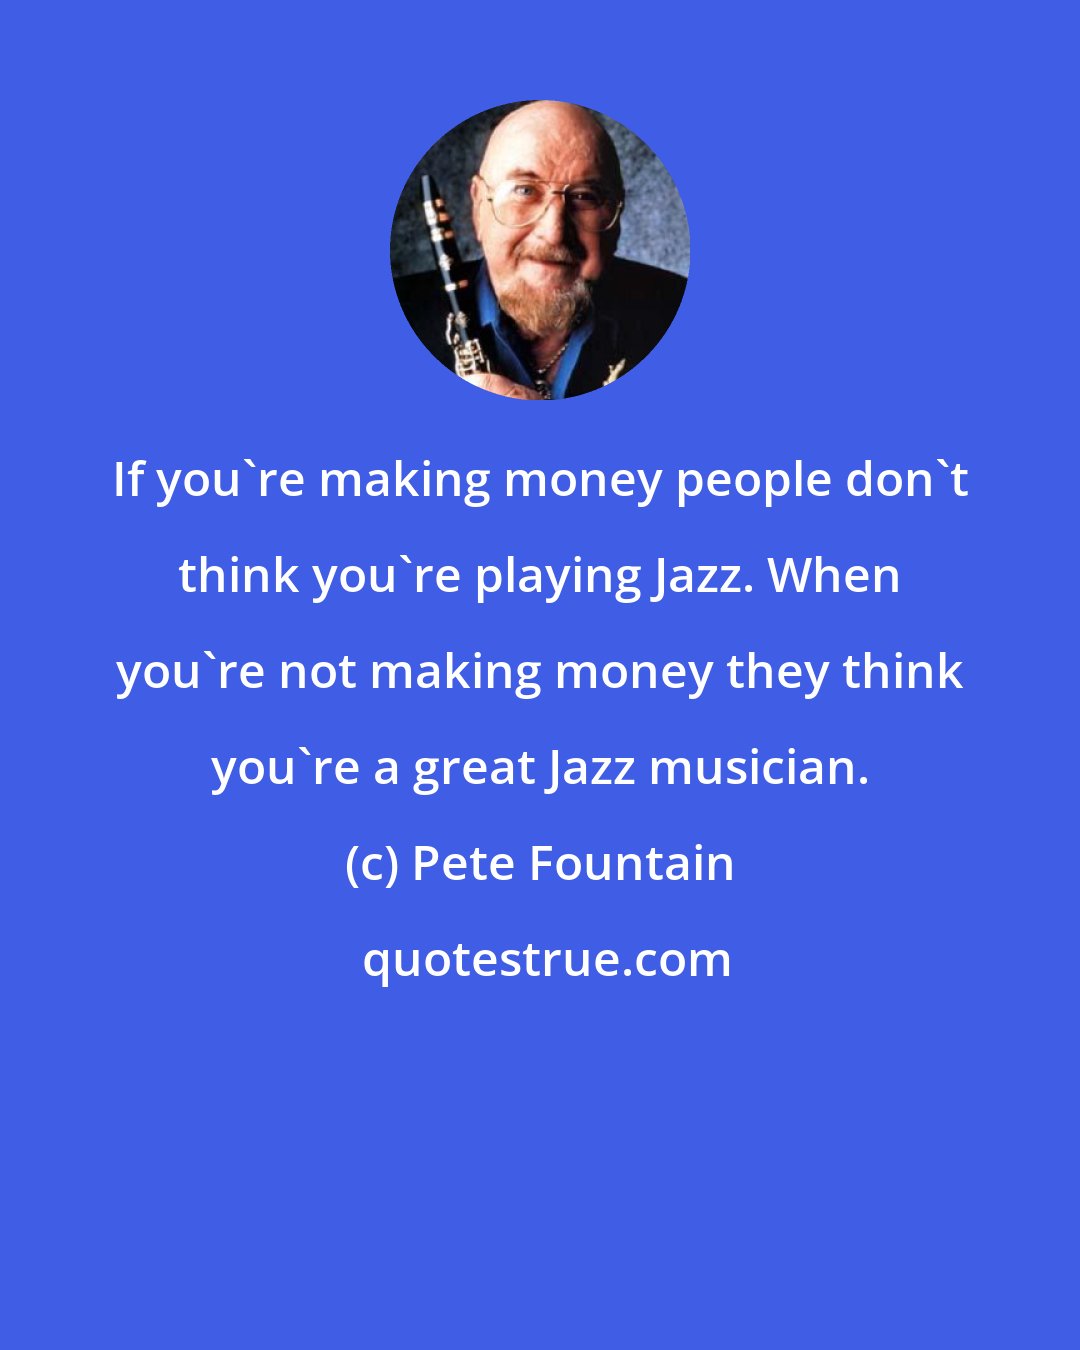 Pete Fountain: If you're making money people don't think you're playing Jazz. When you're not making money they think you're a great Jazz musician.